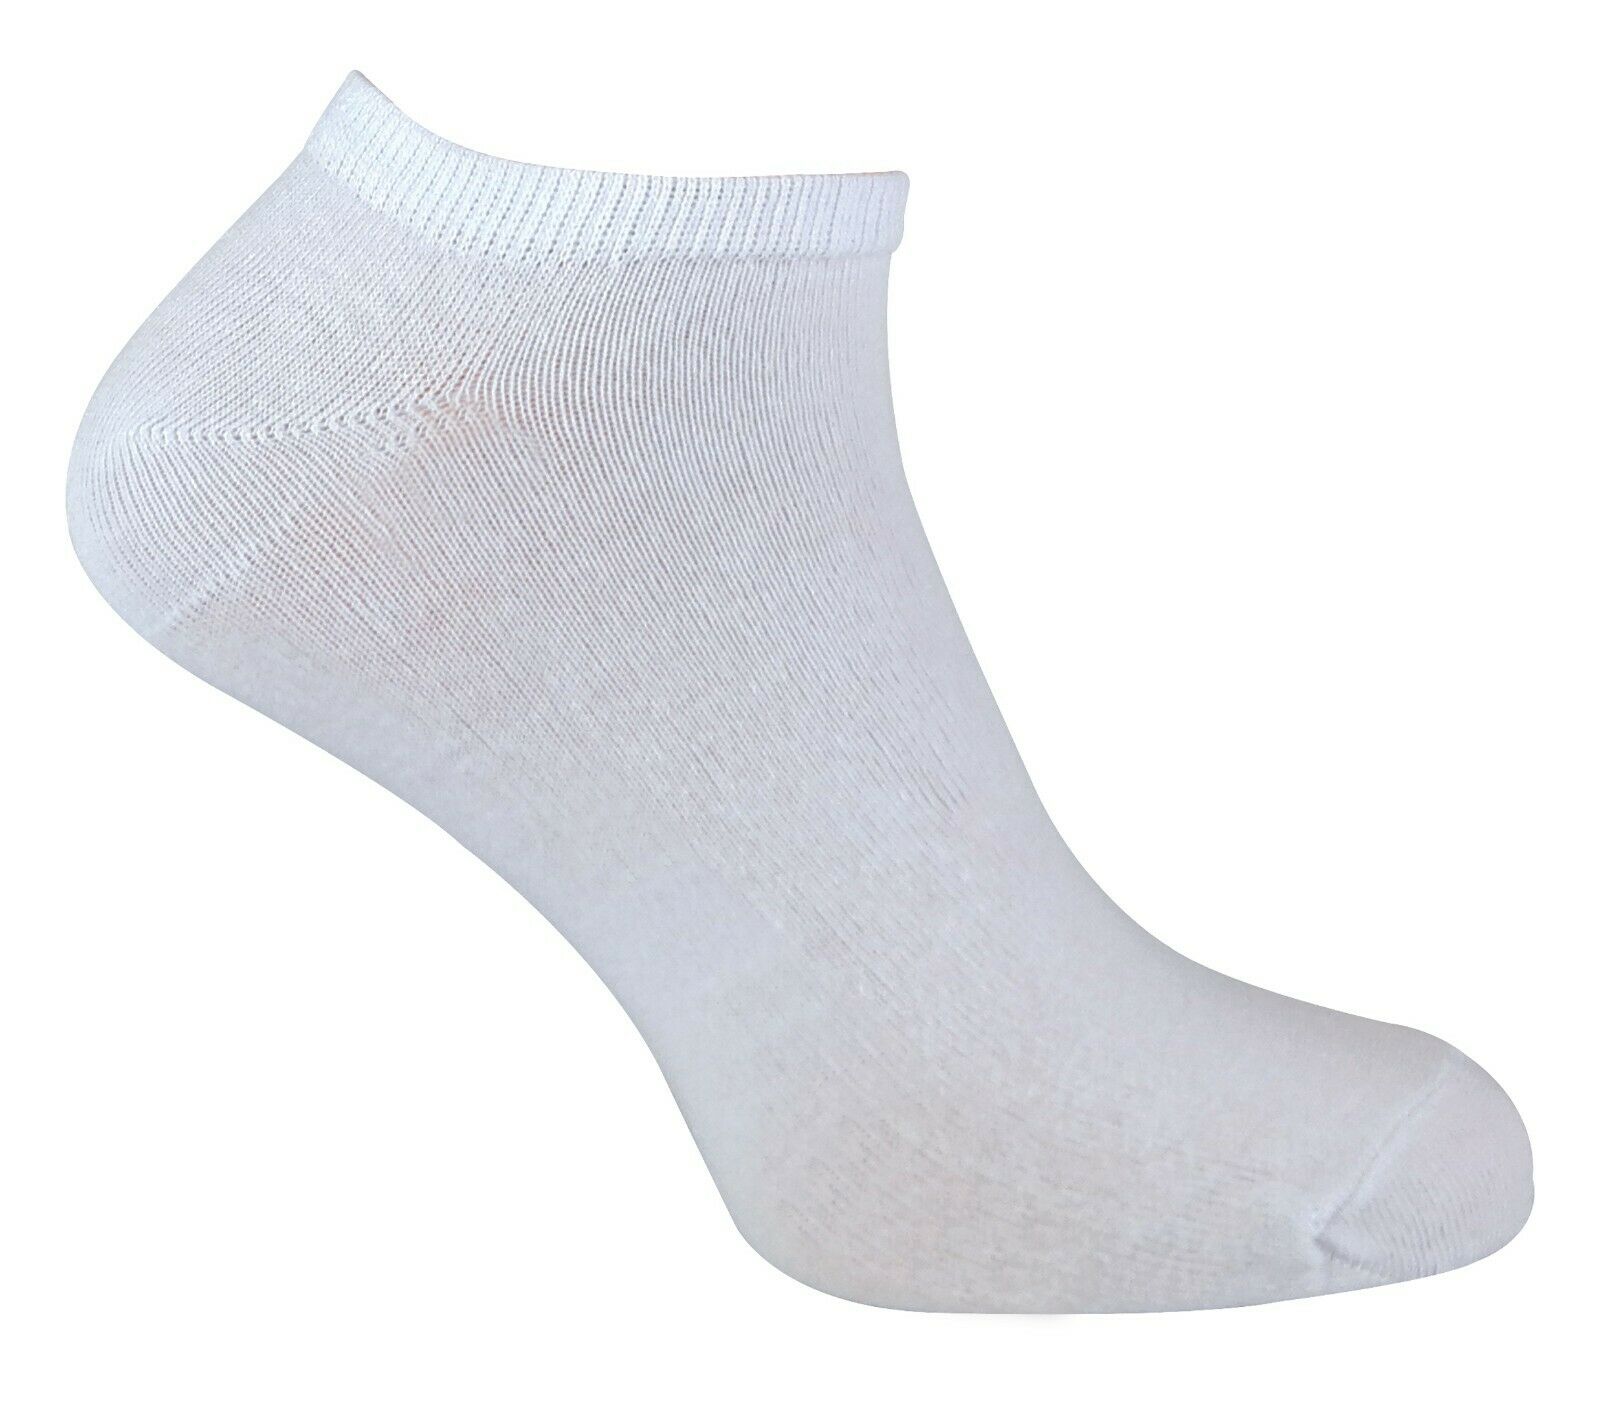 Low Cut Ankle Socks Trainer Socks, 3 pack, assorted colors,